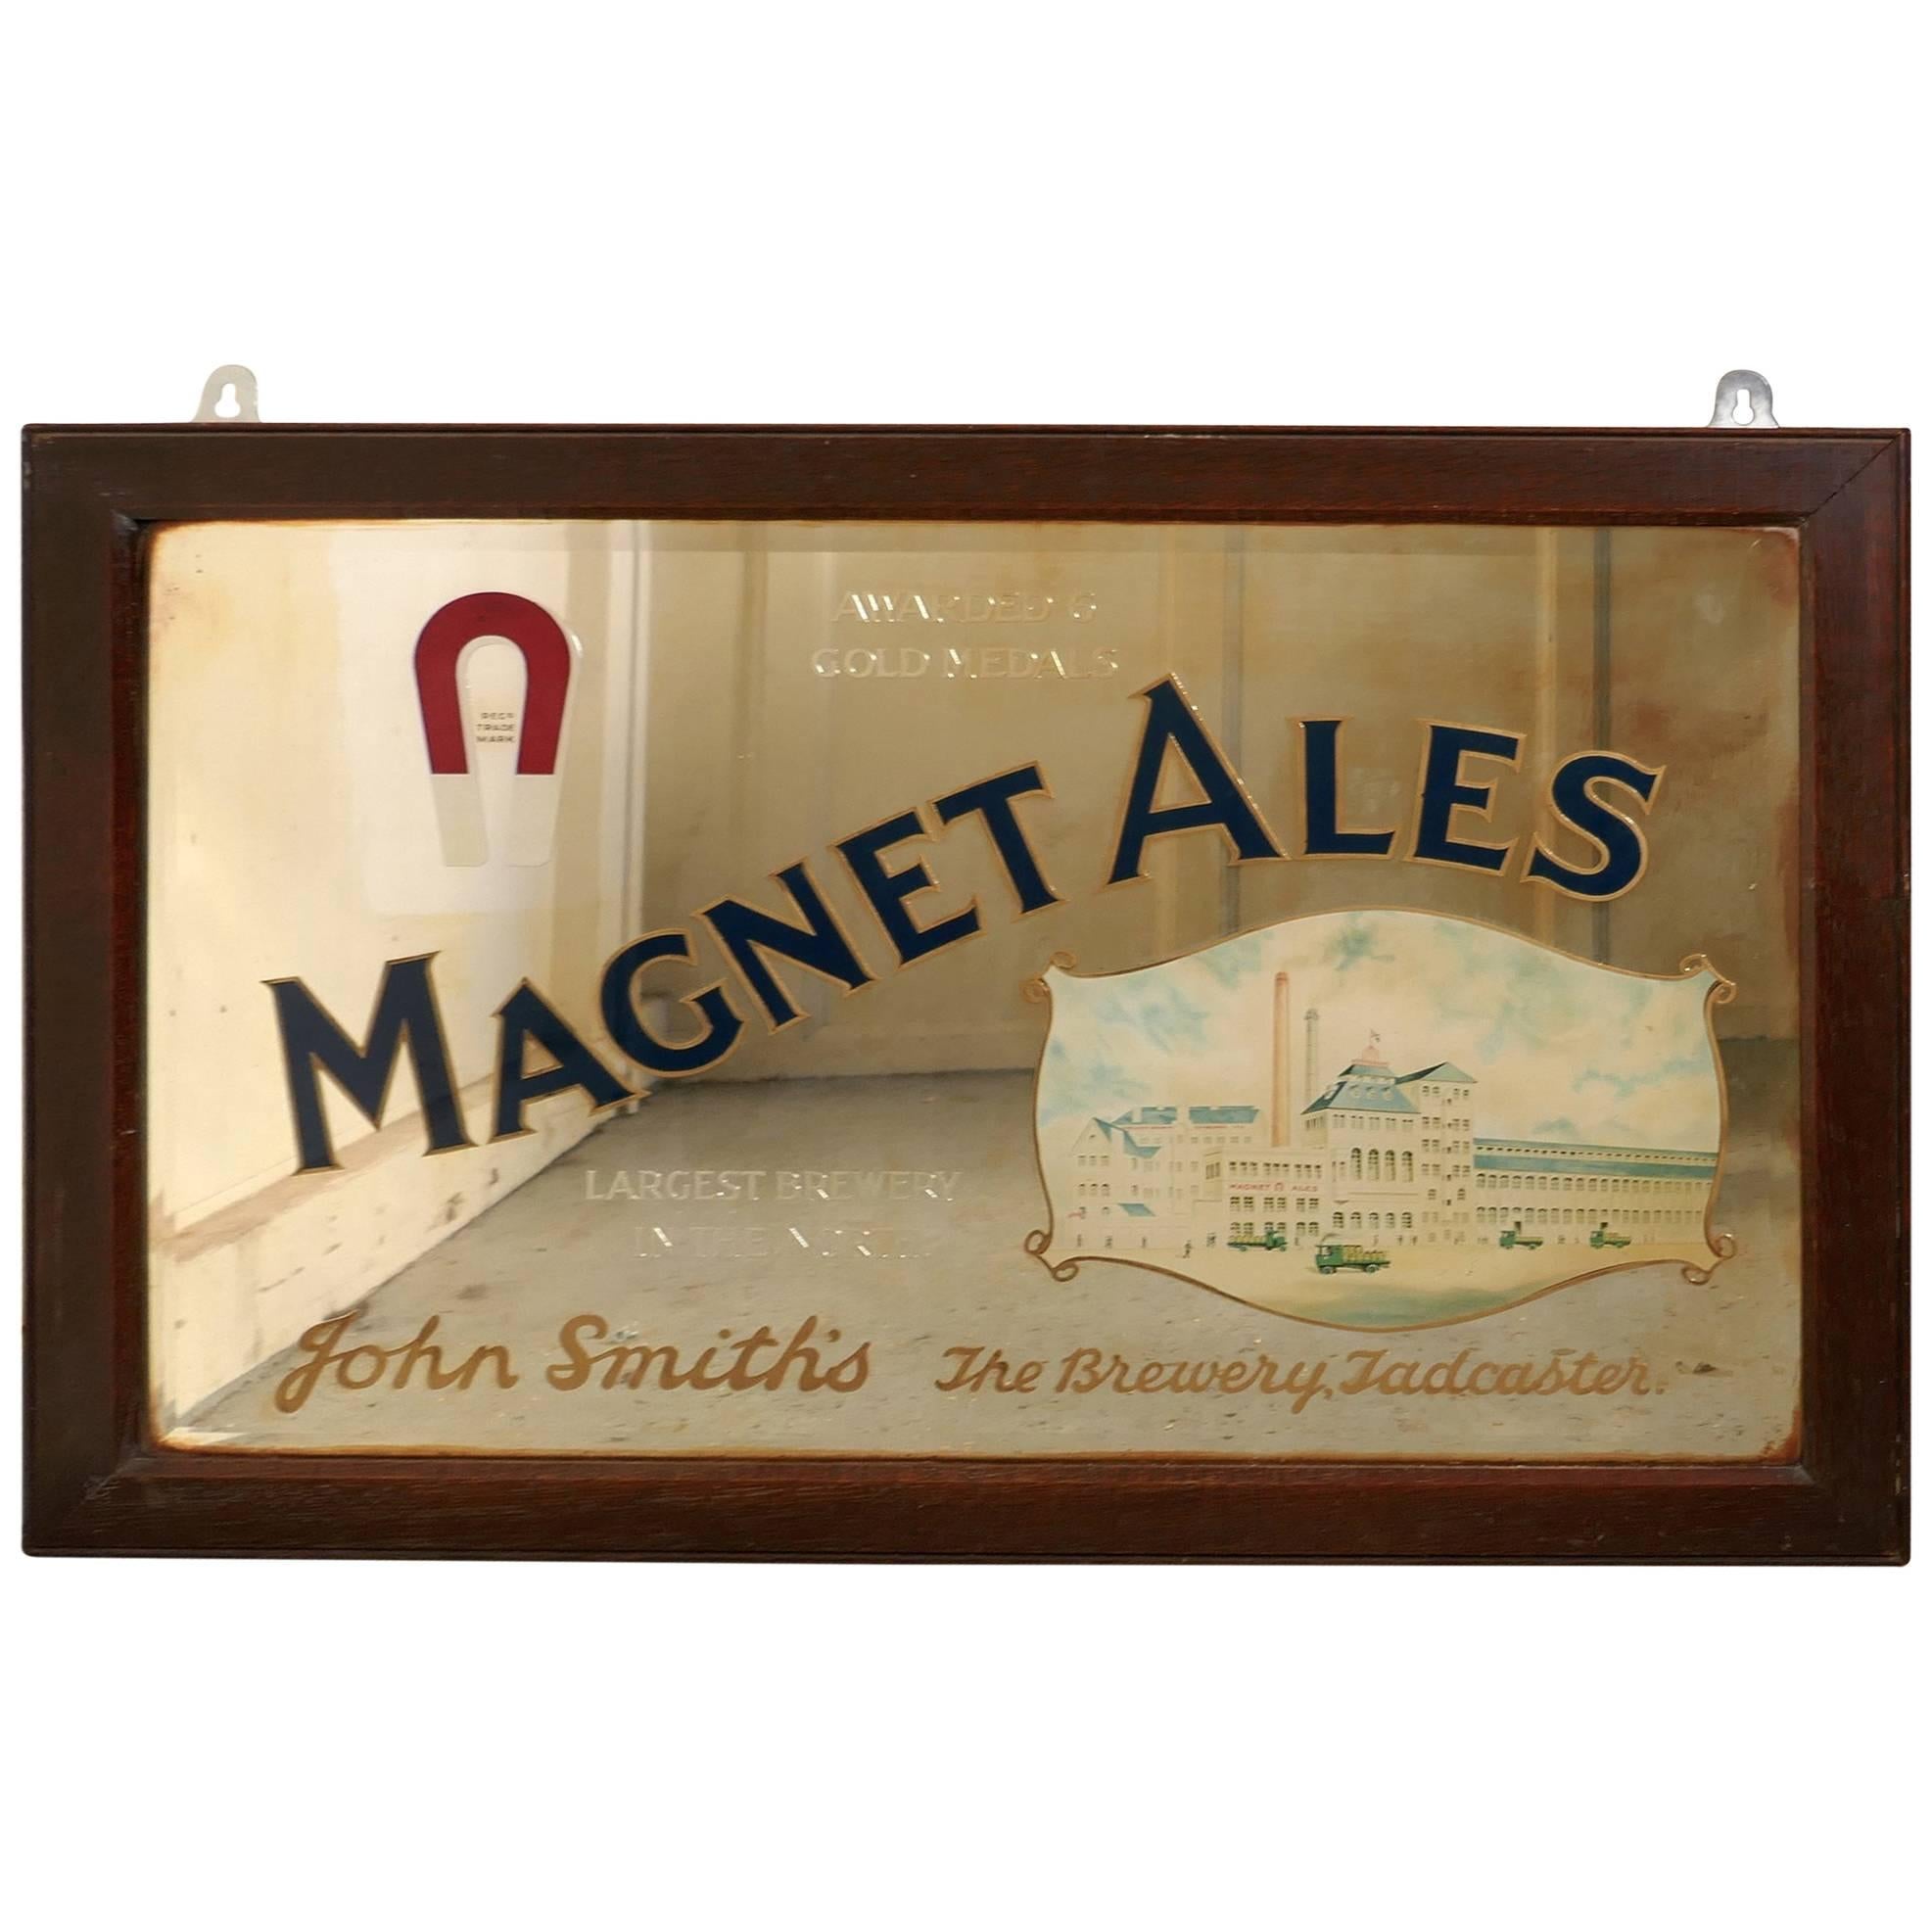 Large John Smith’s Advertising Mirror, Pub Mirror for Magnet Ales